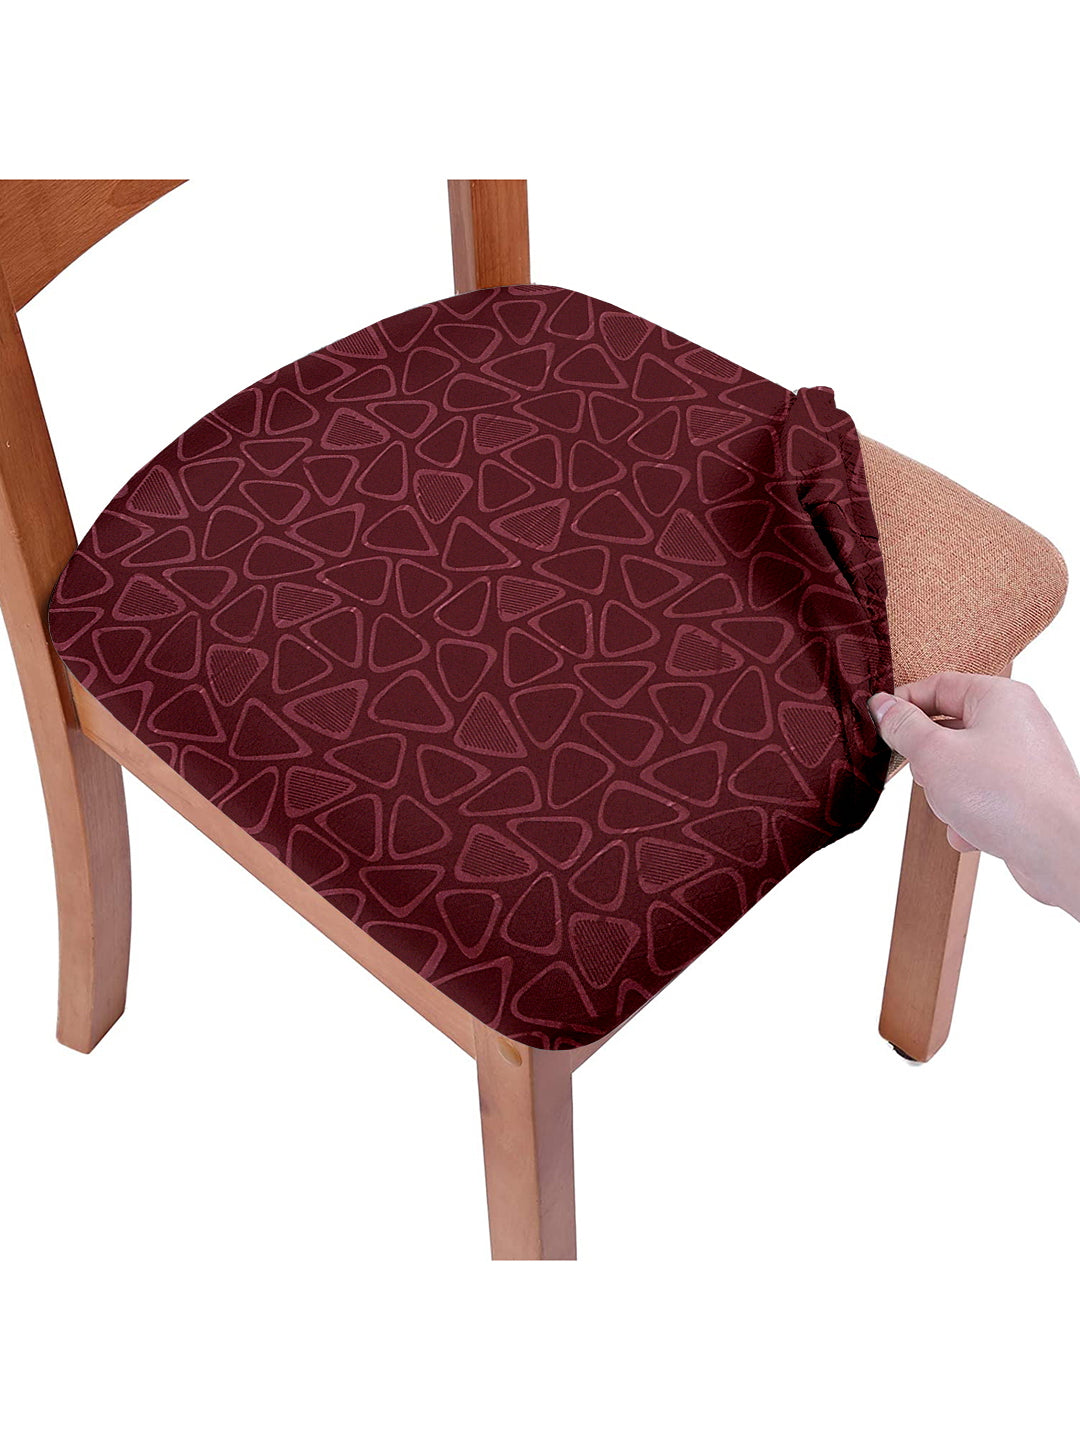 Stretchable Digital Printed Non Slip Chair Pad Cover Pack of 1- Maroon